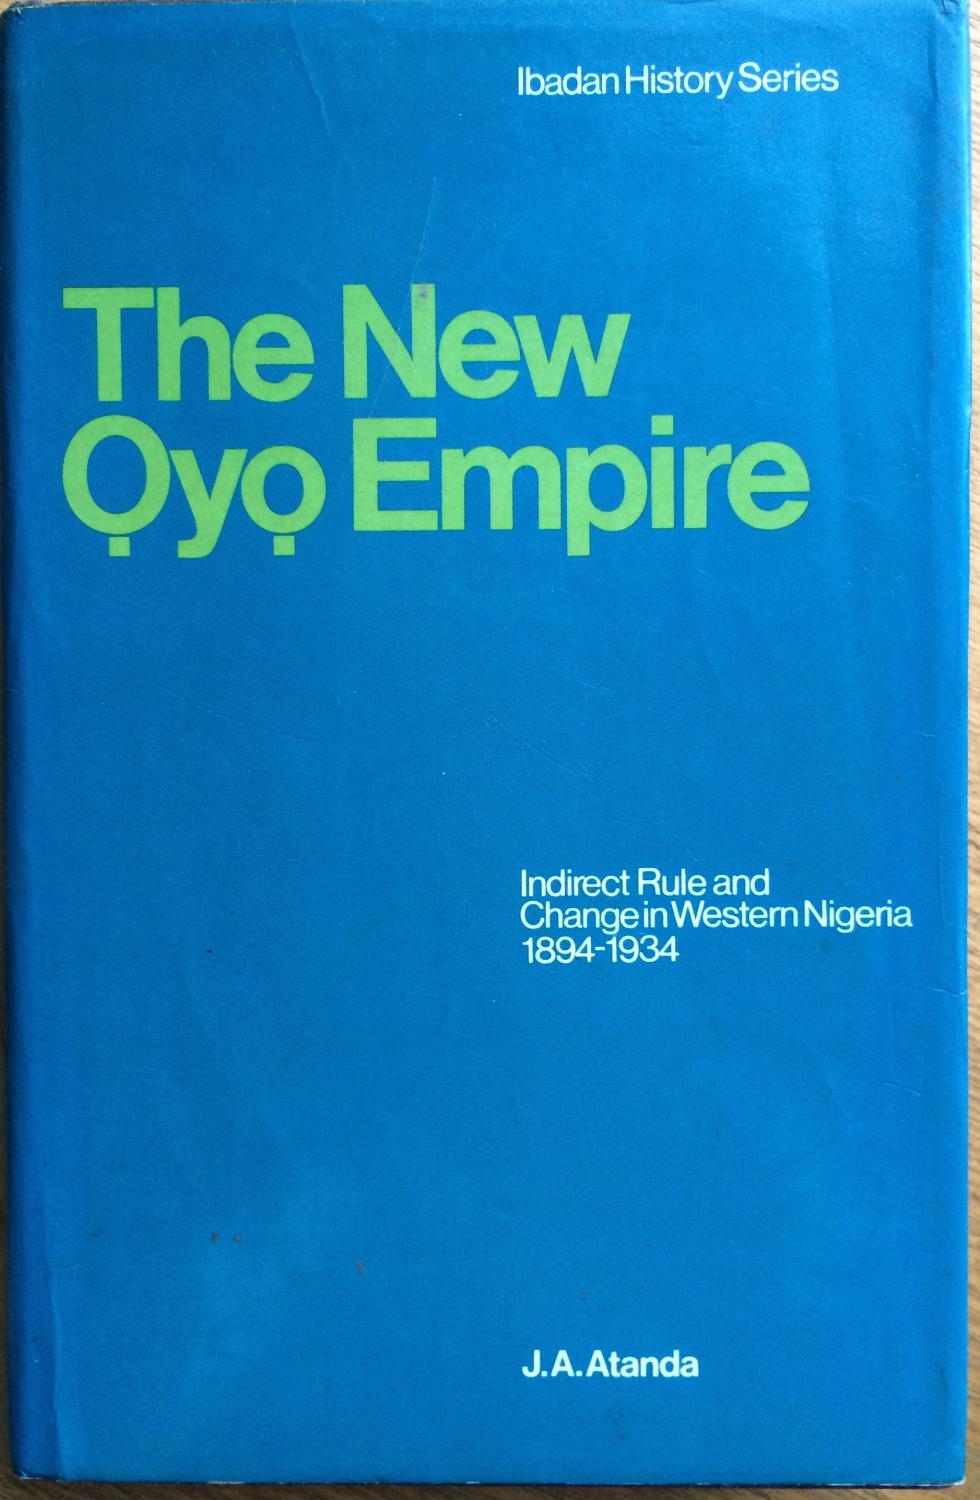 The new Oyo empire: indirect rule and change in Western Nigeria, 1894-1934 - Atanda, J.A.